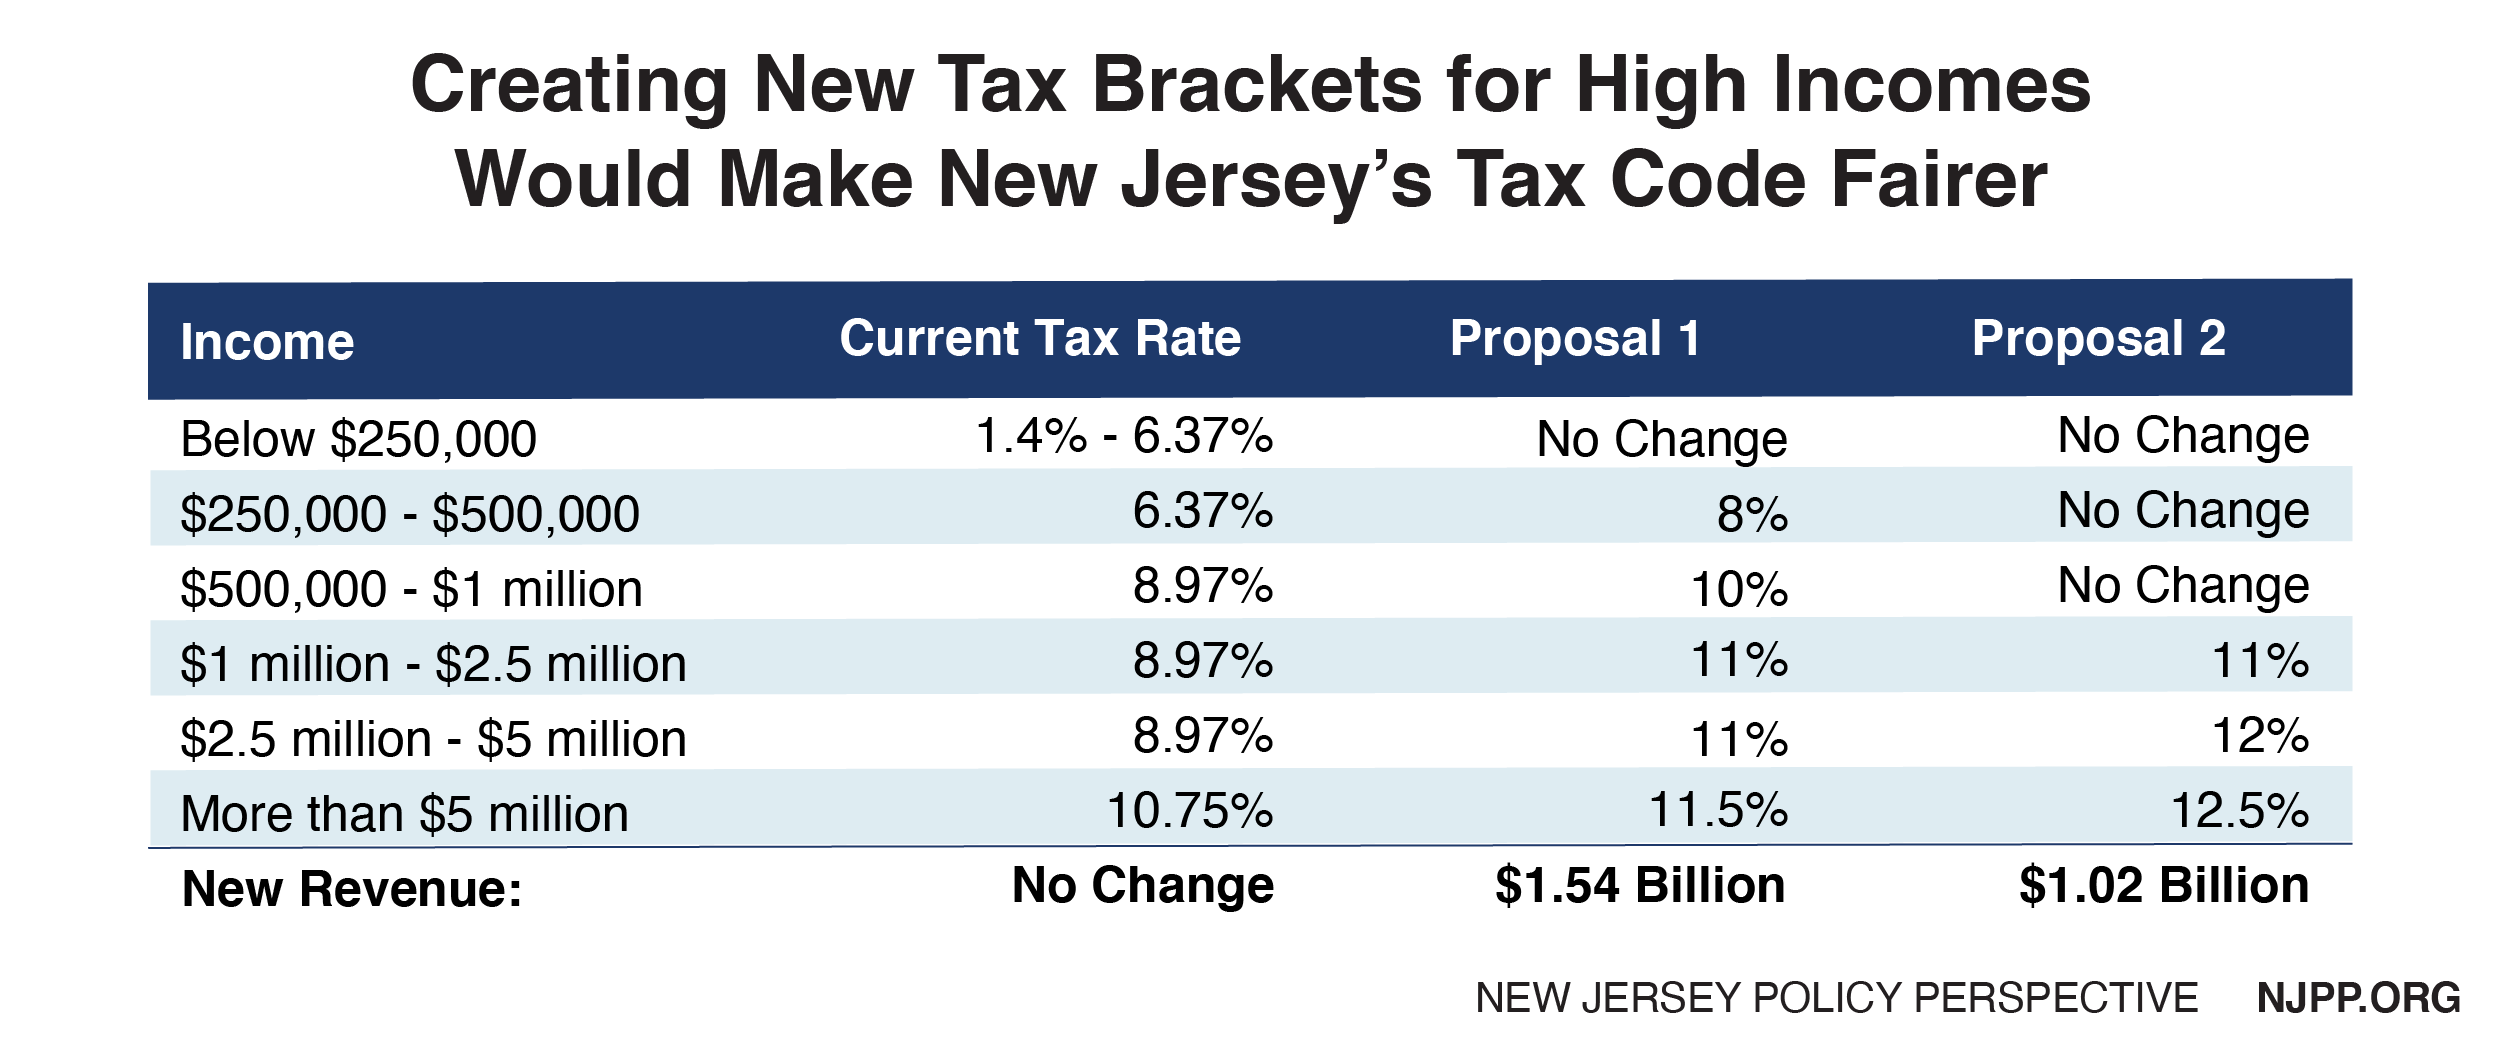 Road to Recovery Reforming New Jersey's Tax Code New Jersey